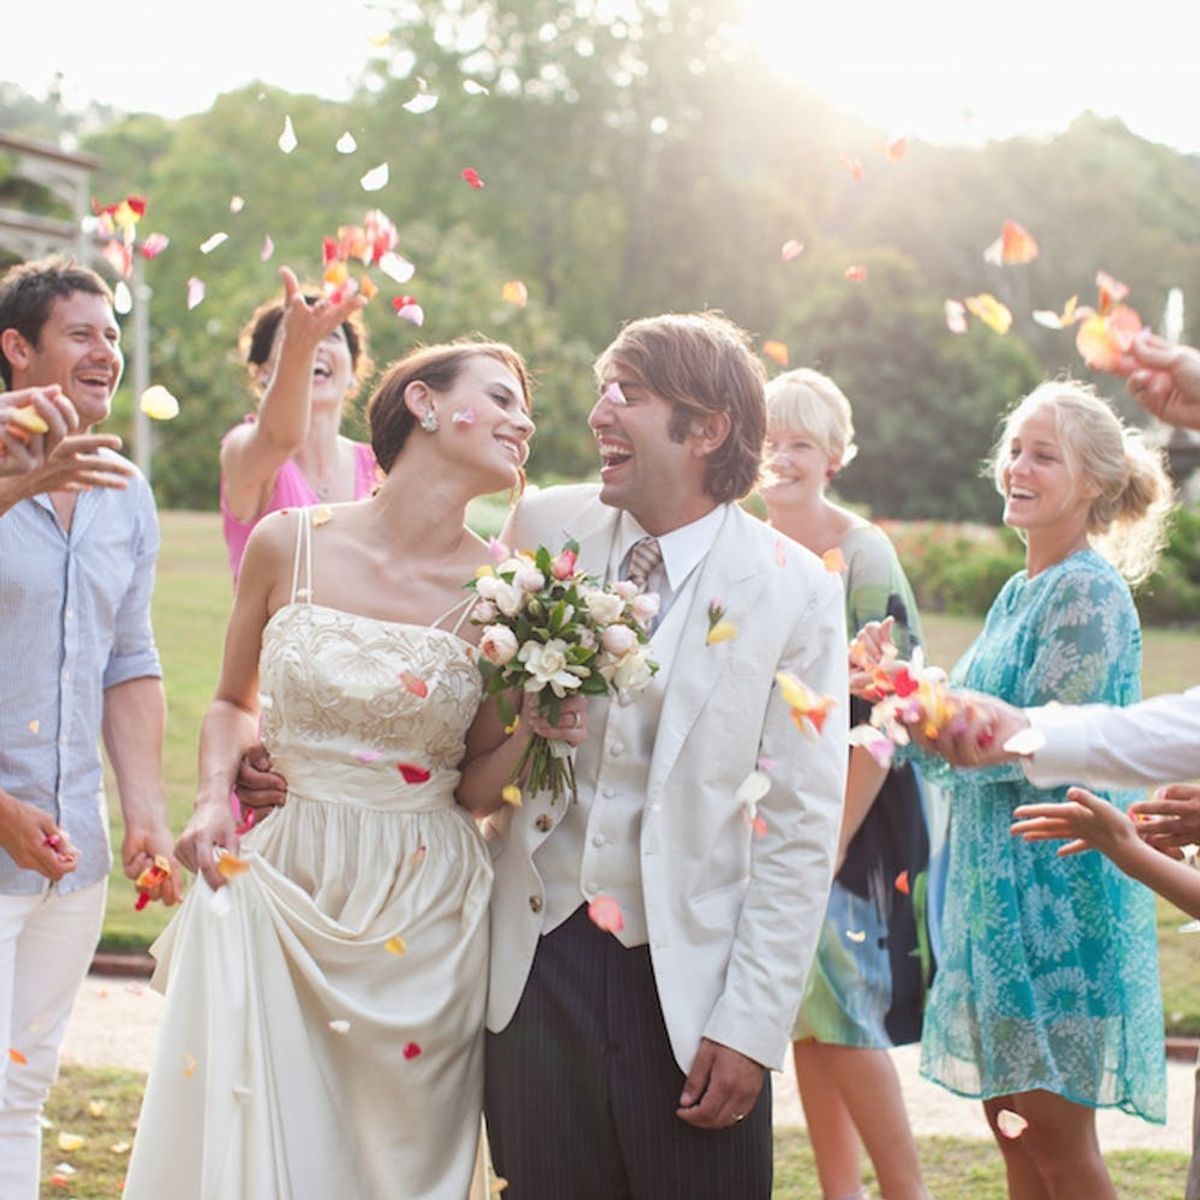 Should You REALLY Invite Your Ex to Your Wedding?